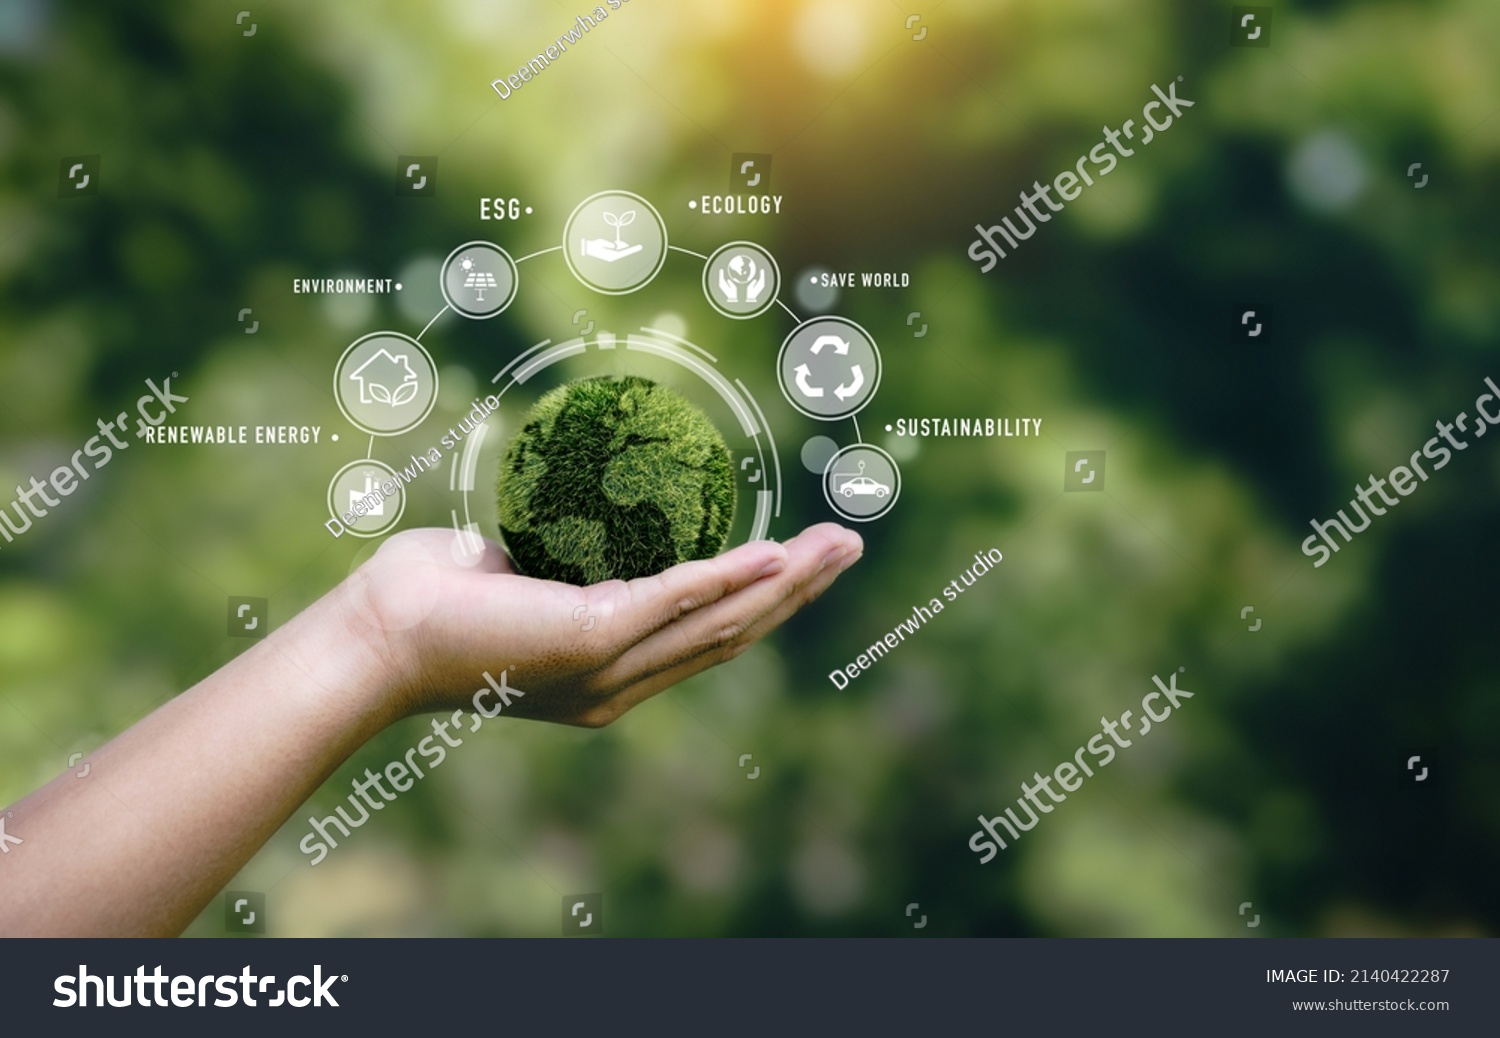 Hand holding a green globe in the concept of nature about management esg, sustainability, ecology and renewable energy for save the world environmental and conservation  #2140422287